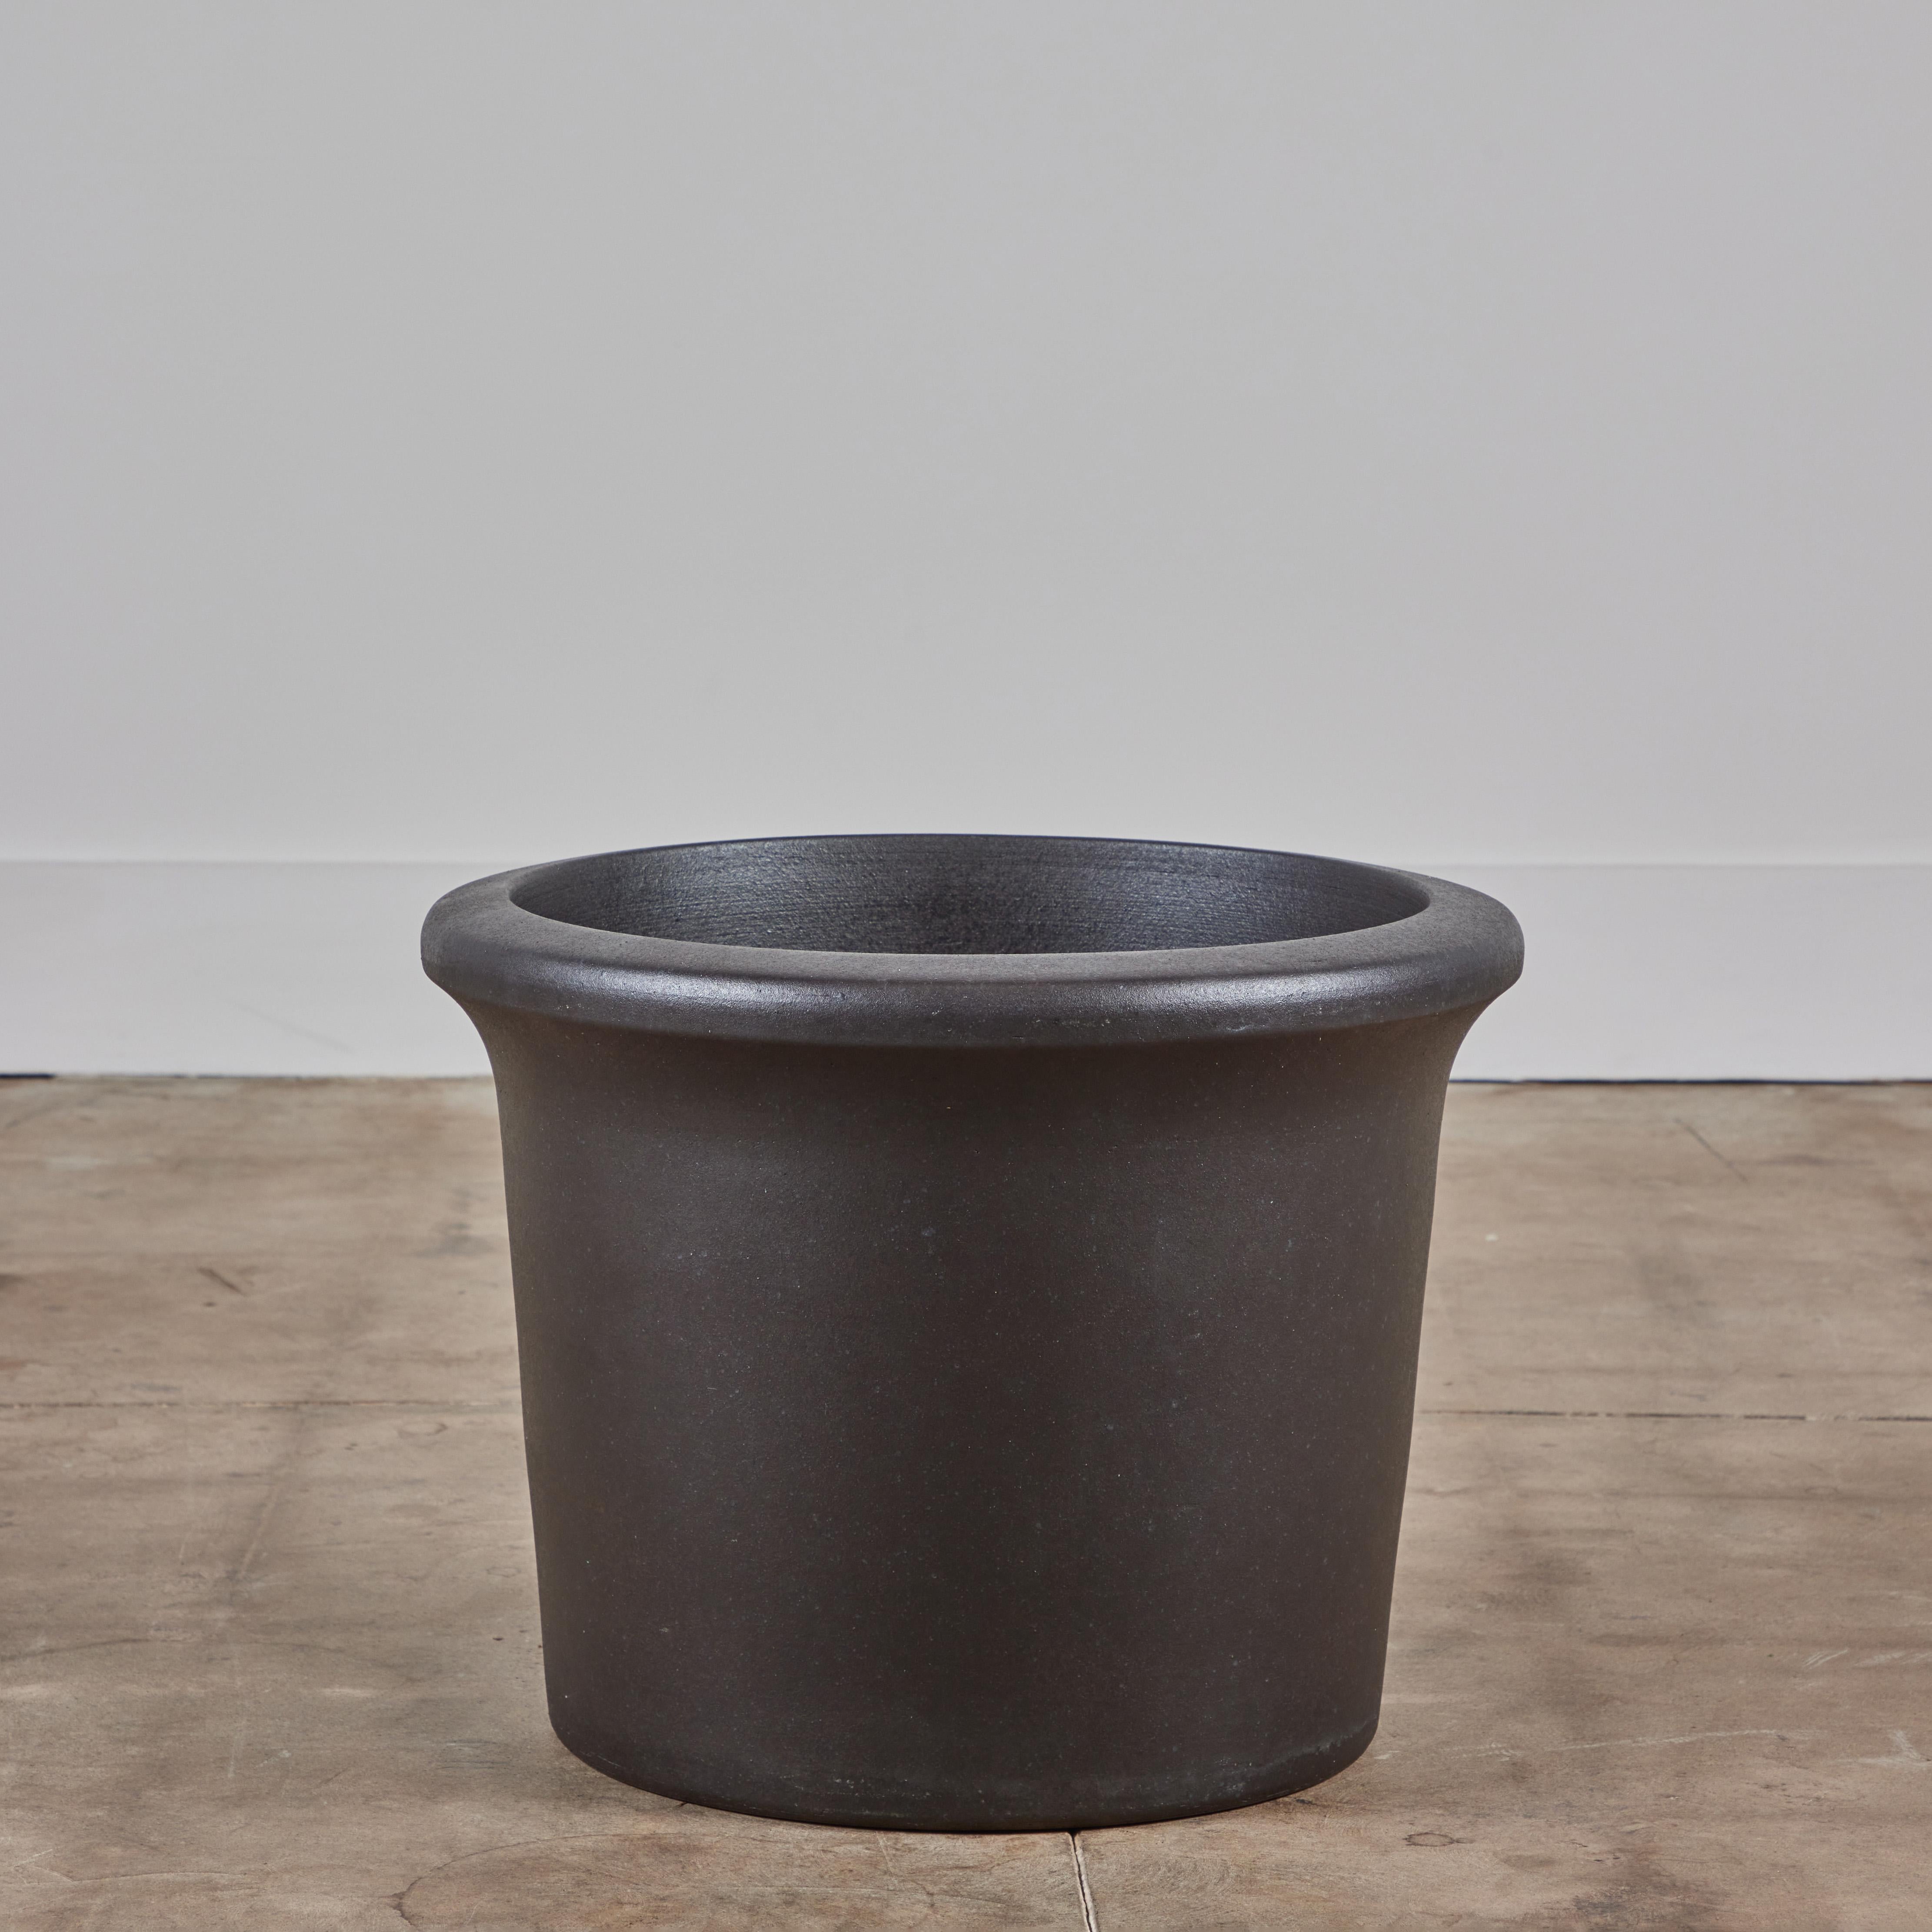 A beautiful black glaze tulip planter by Architectural Pottery. This AP-3203 planter has a drum shape with a rounded lip that curves in at the top of the piece. Architectural Pottery containers can be planted in directly or used as a decorative